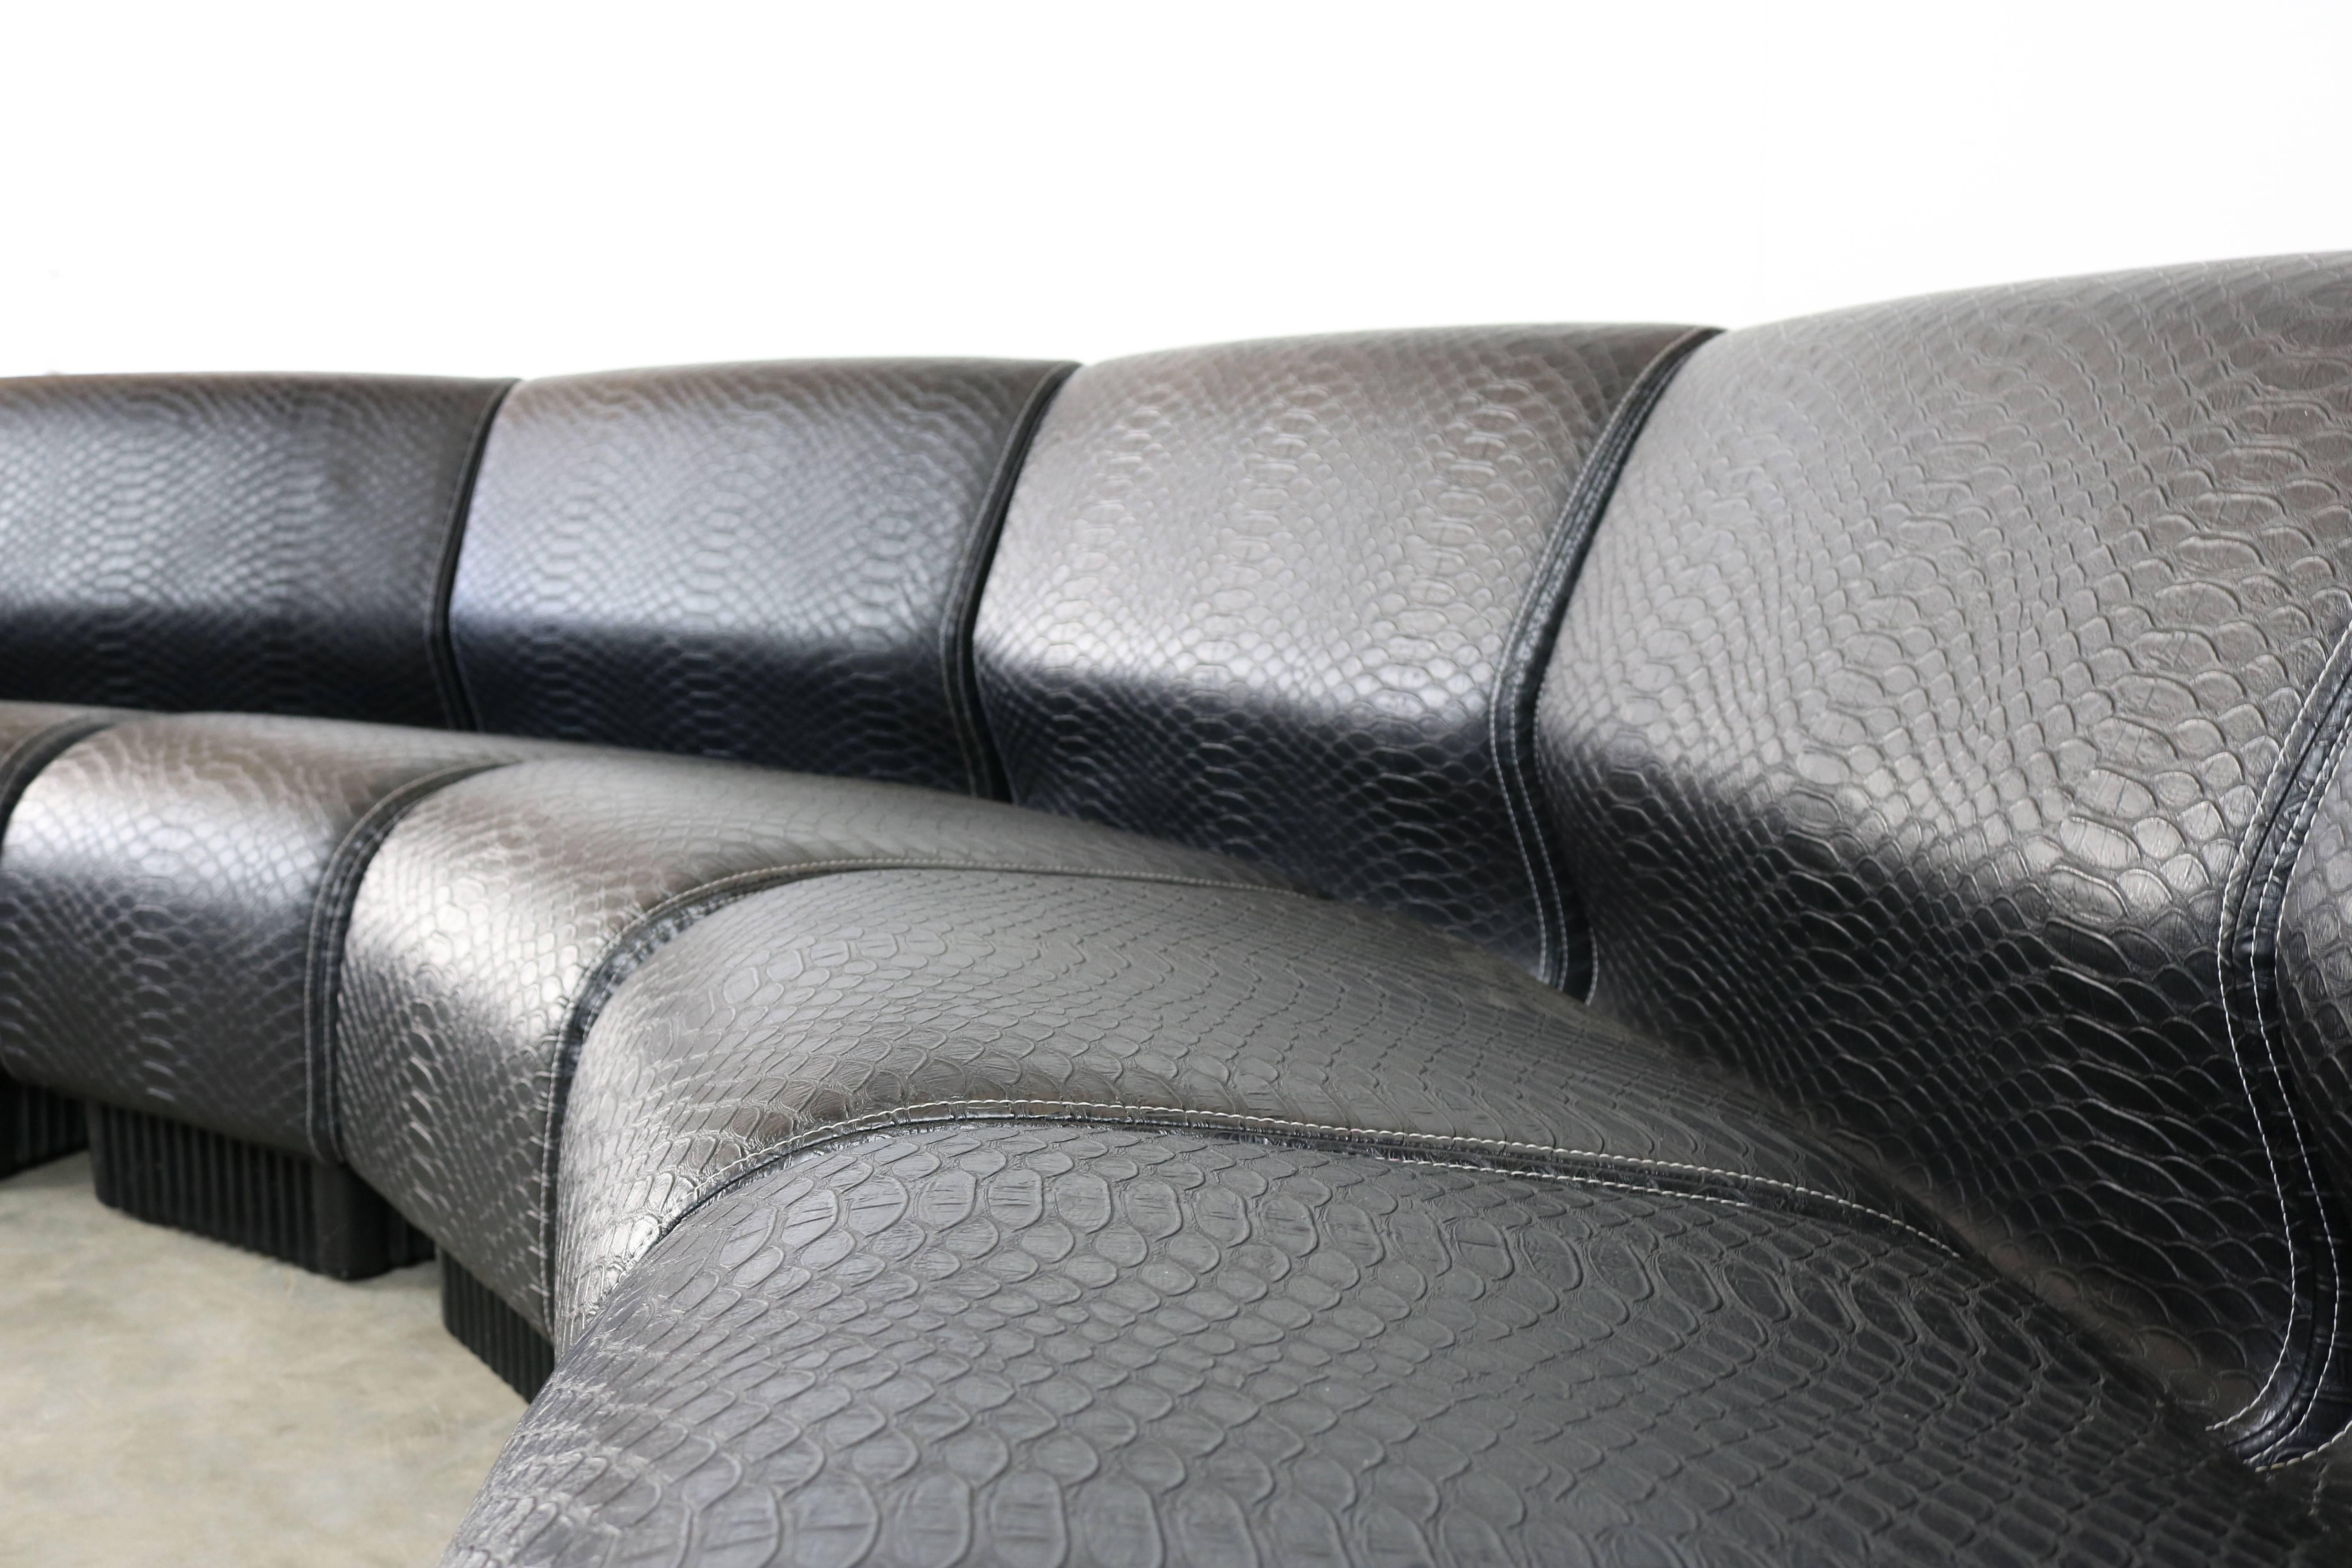 Faux Leather Midcentury Modular Sofa by Don Chadwick for Herman Miller, 1970 Black Snakeskin